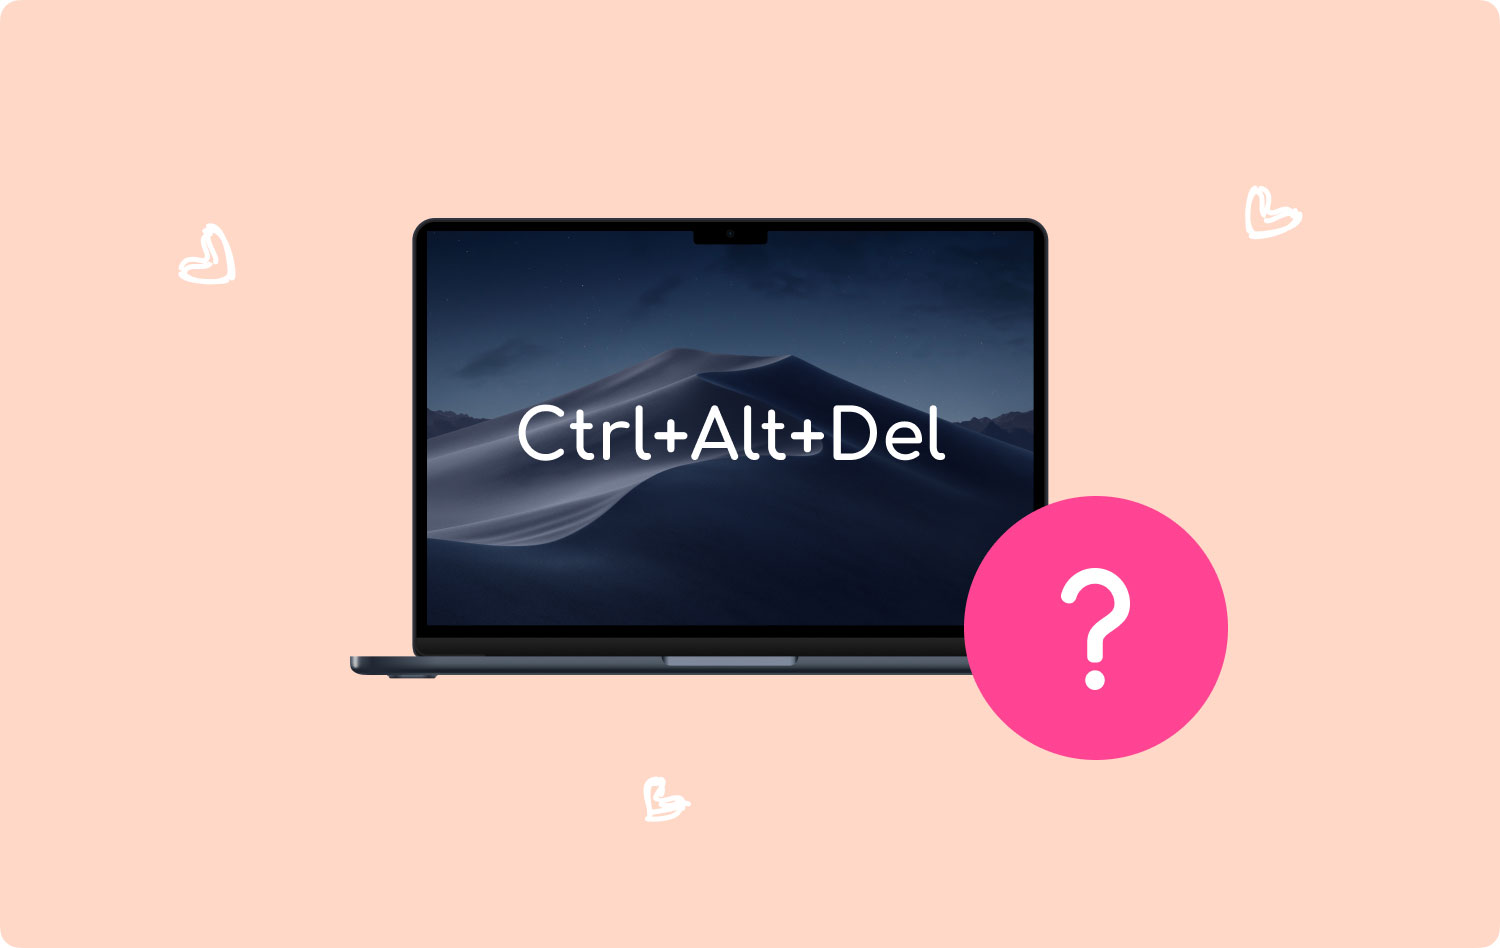 How to Control + Alt + Delete on A Mac